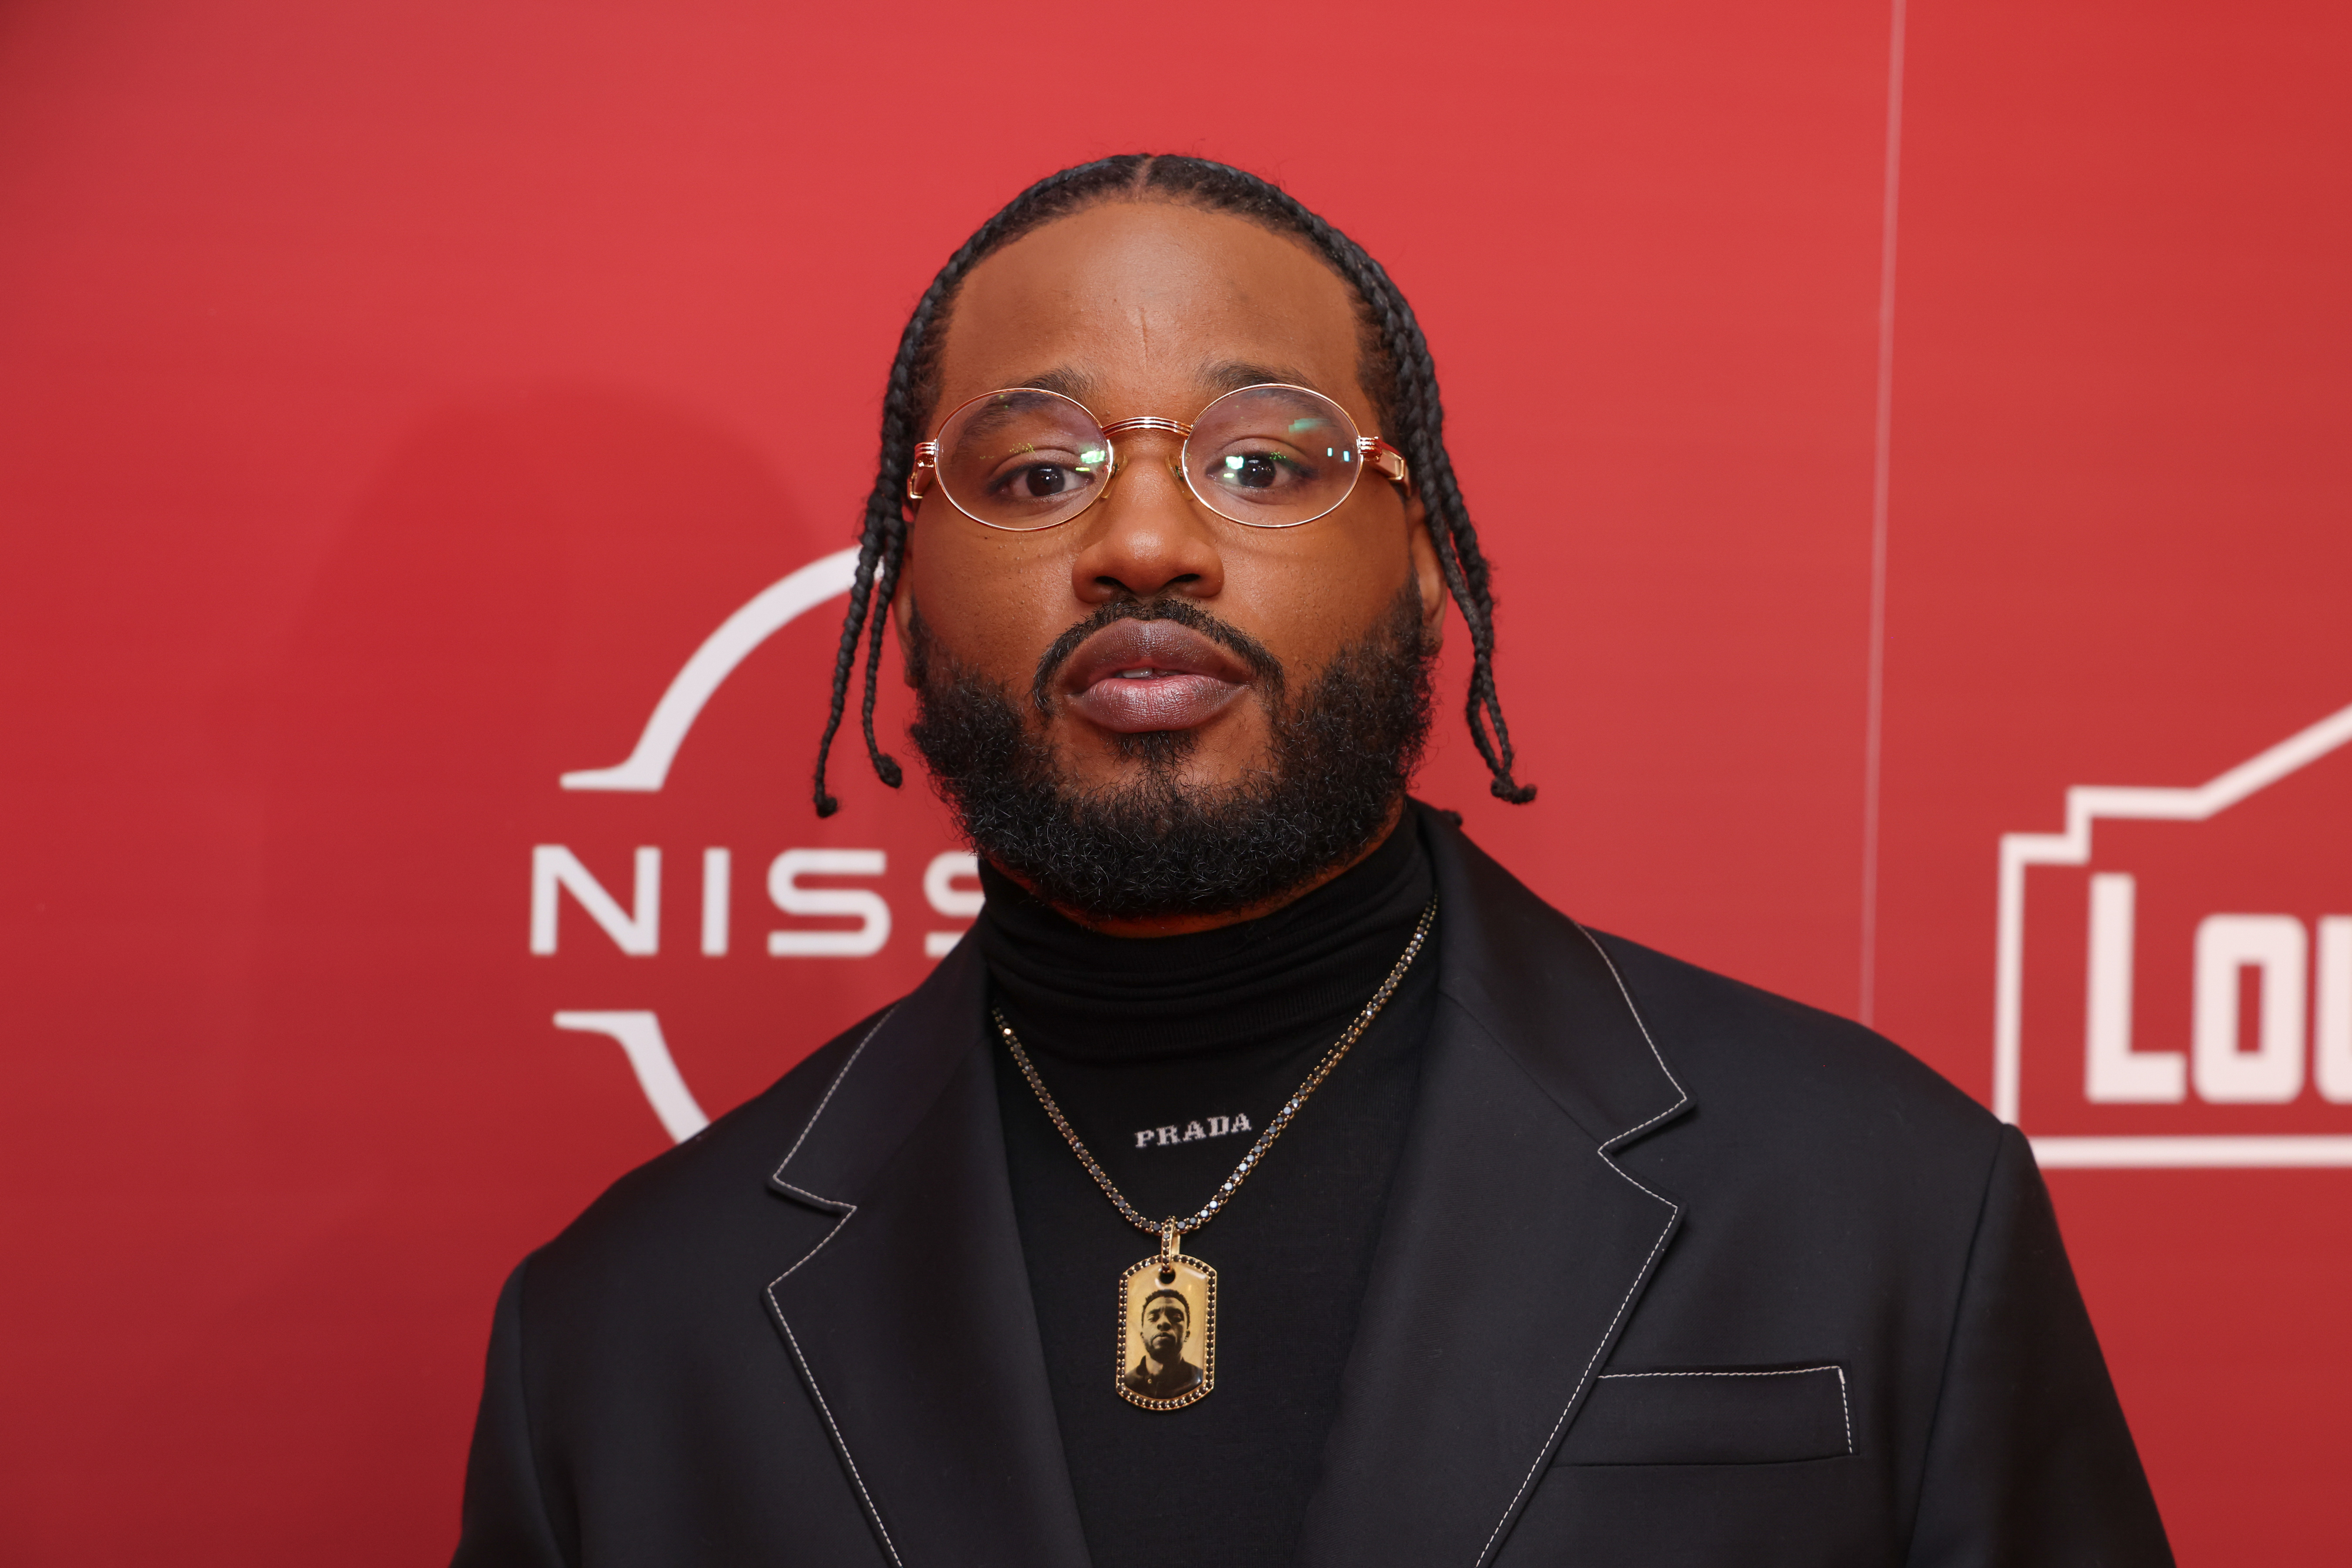 Man with braided hair, black turtleneck and jacket, Prada necklace, posing against a red background